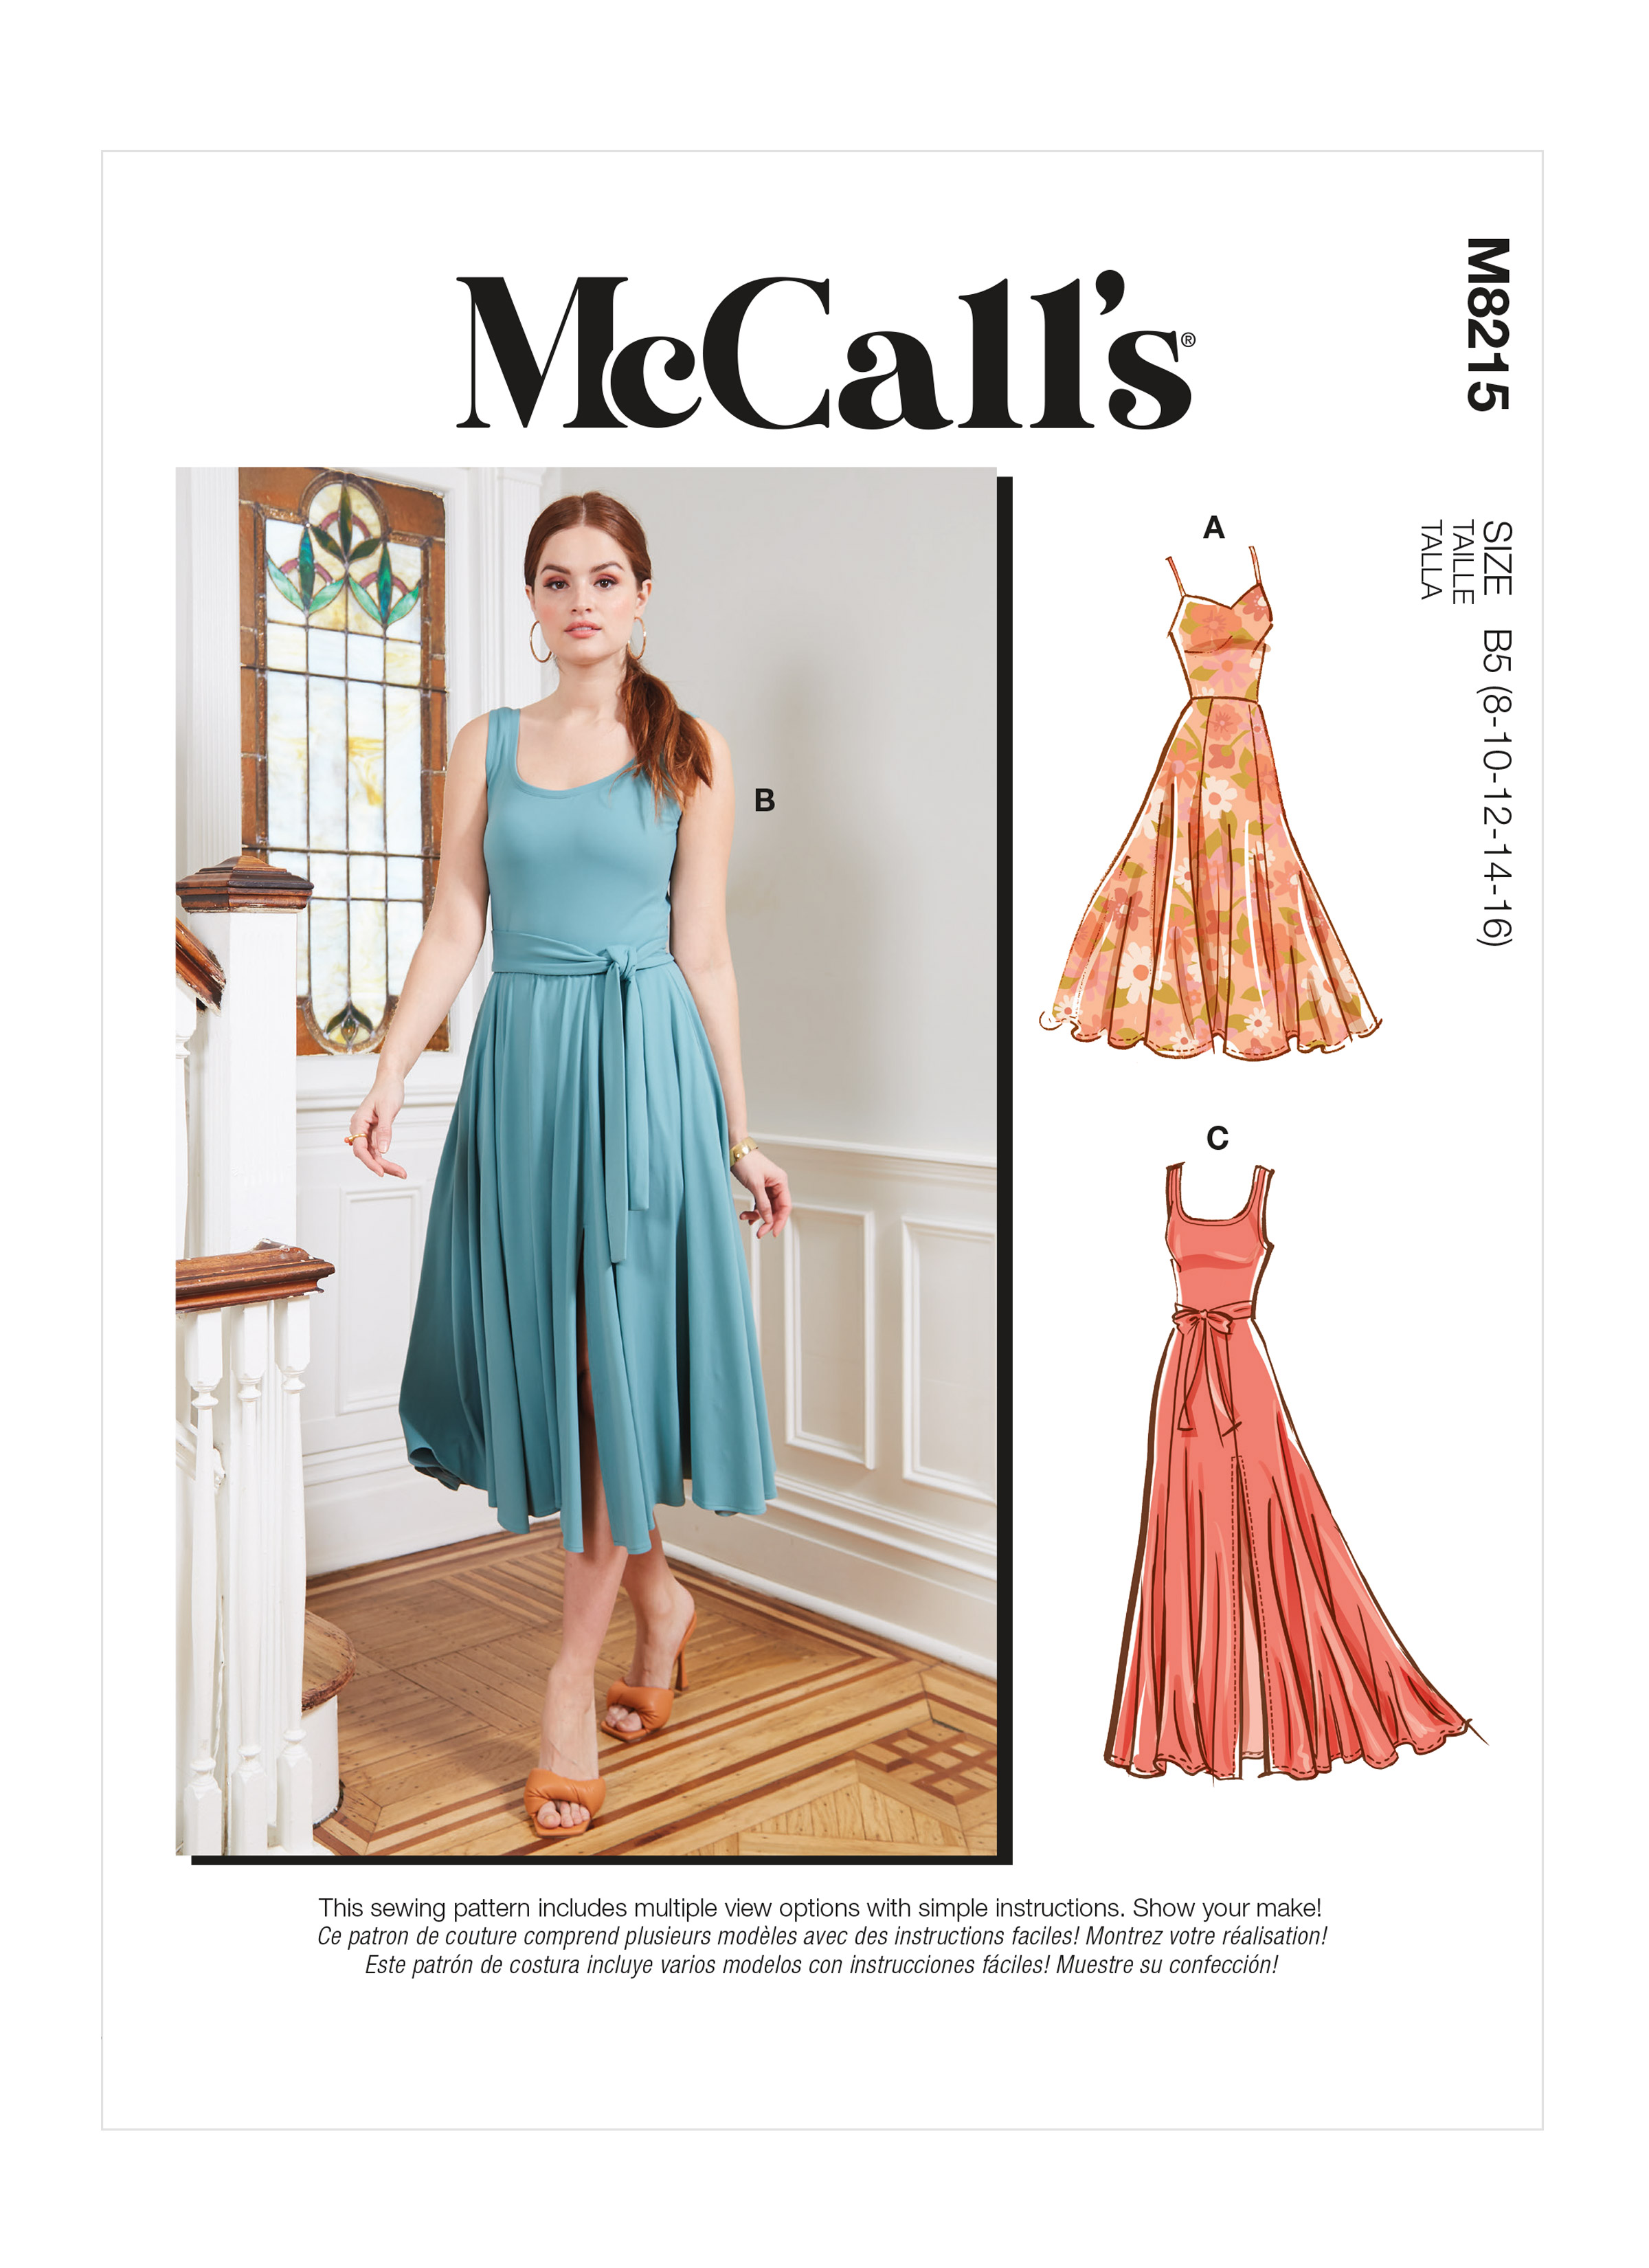 Is this much ease normal in McCall's patterns? : r/sewing